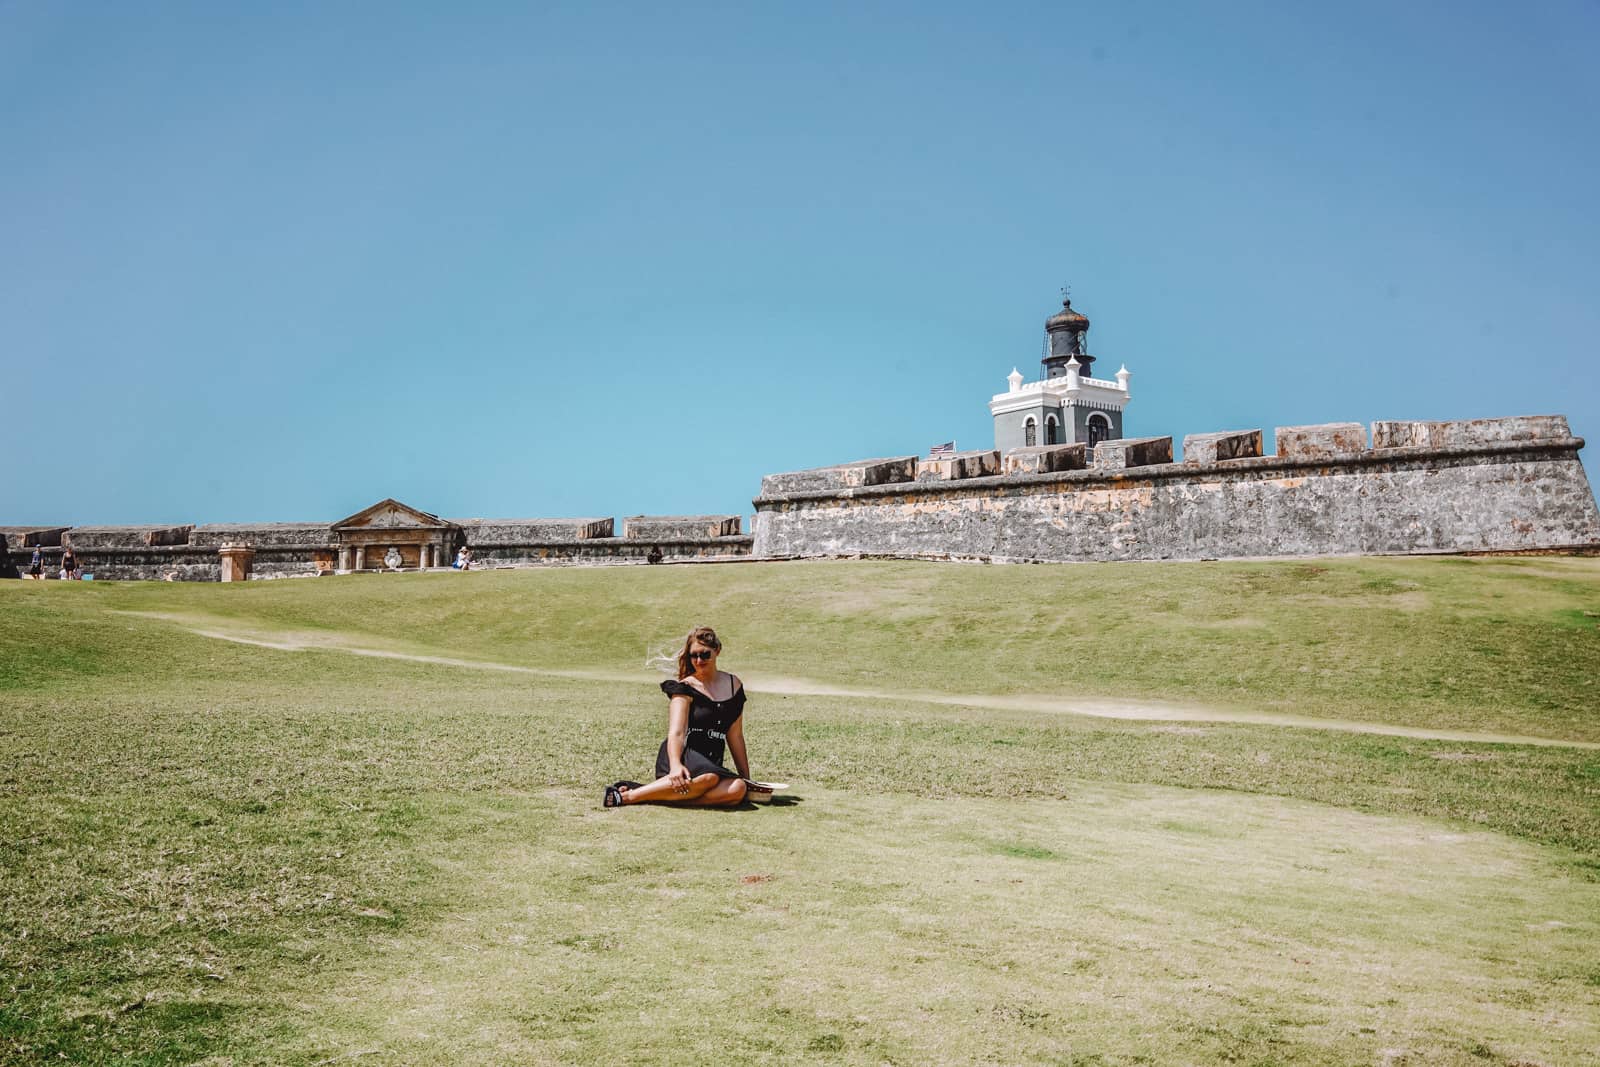 Instagrammable places near Old San Juan: